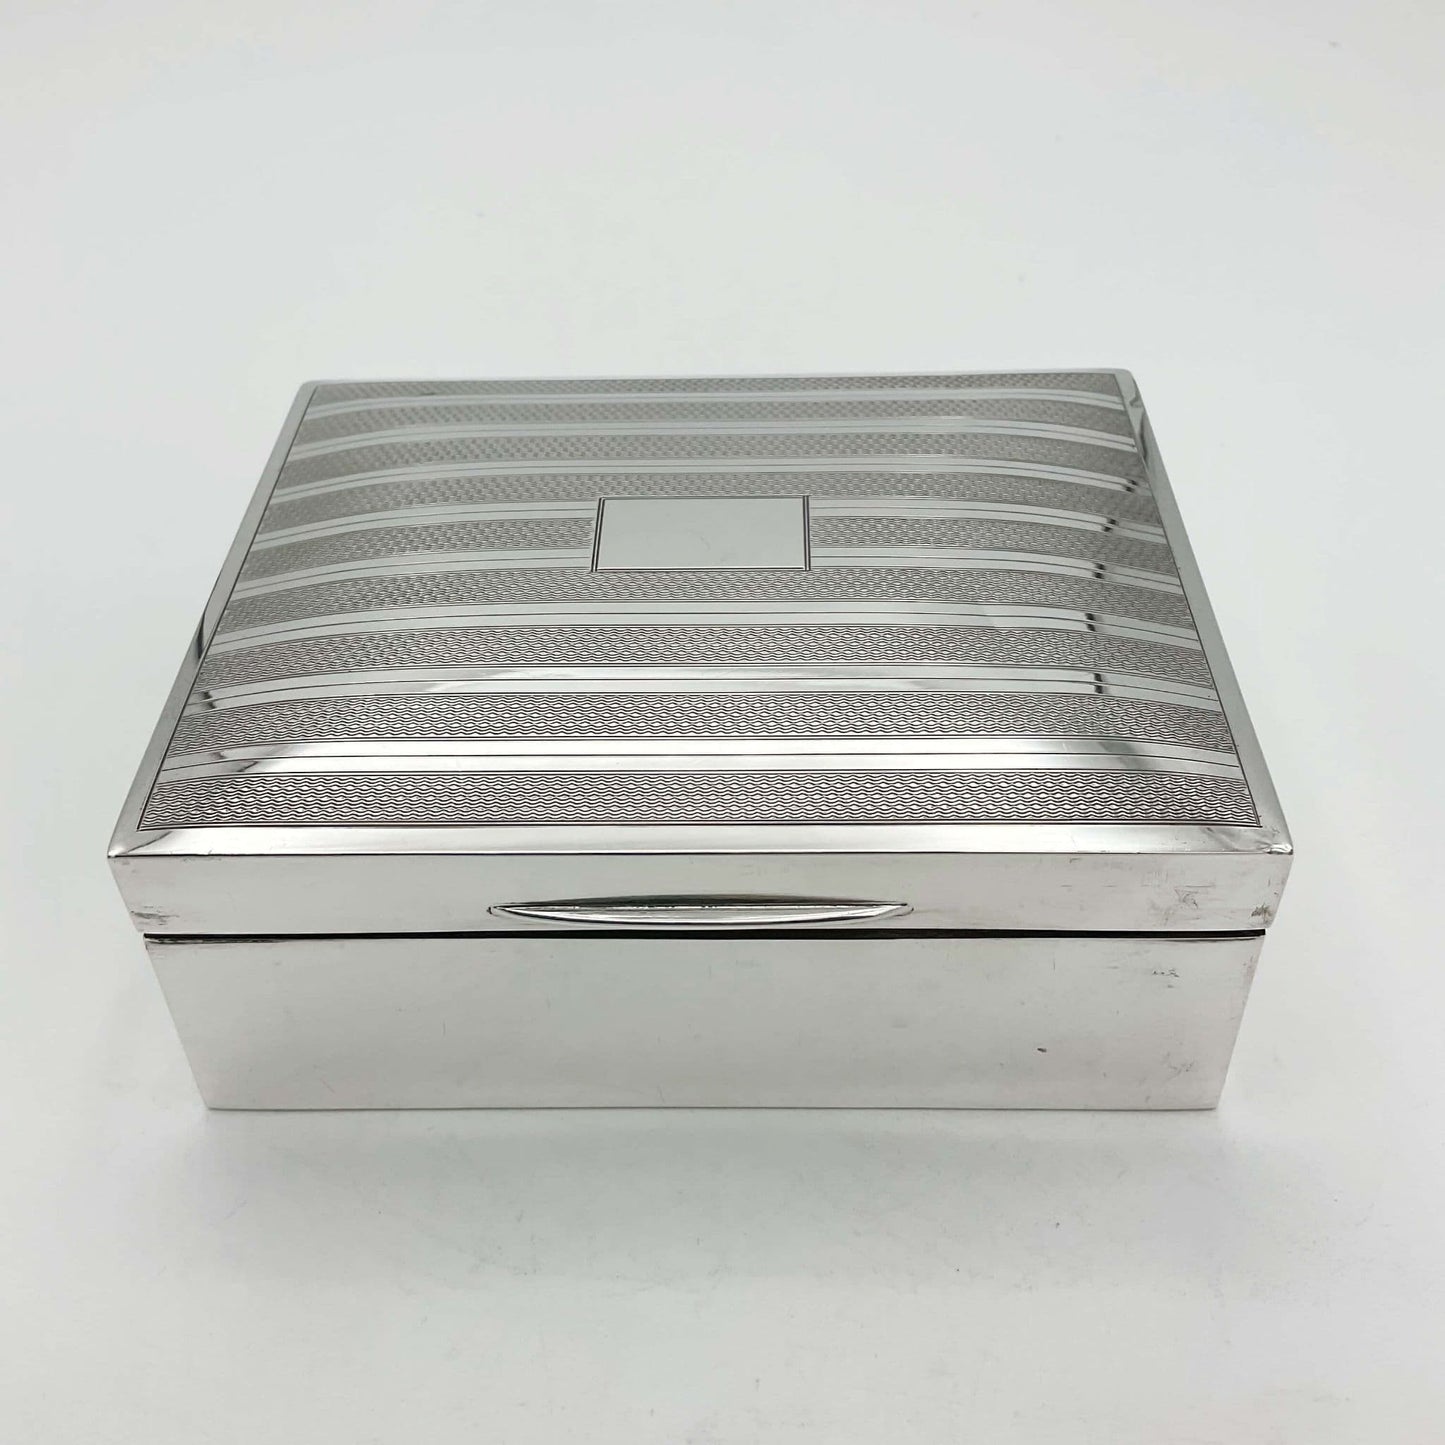 vintage 1920s sterling silver cigarette box on a whiter background